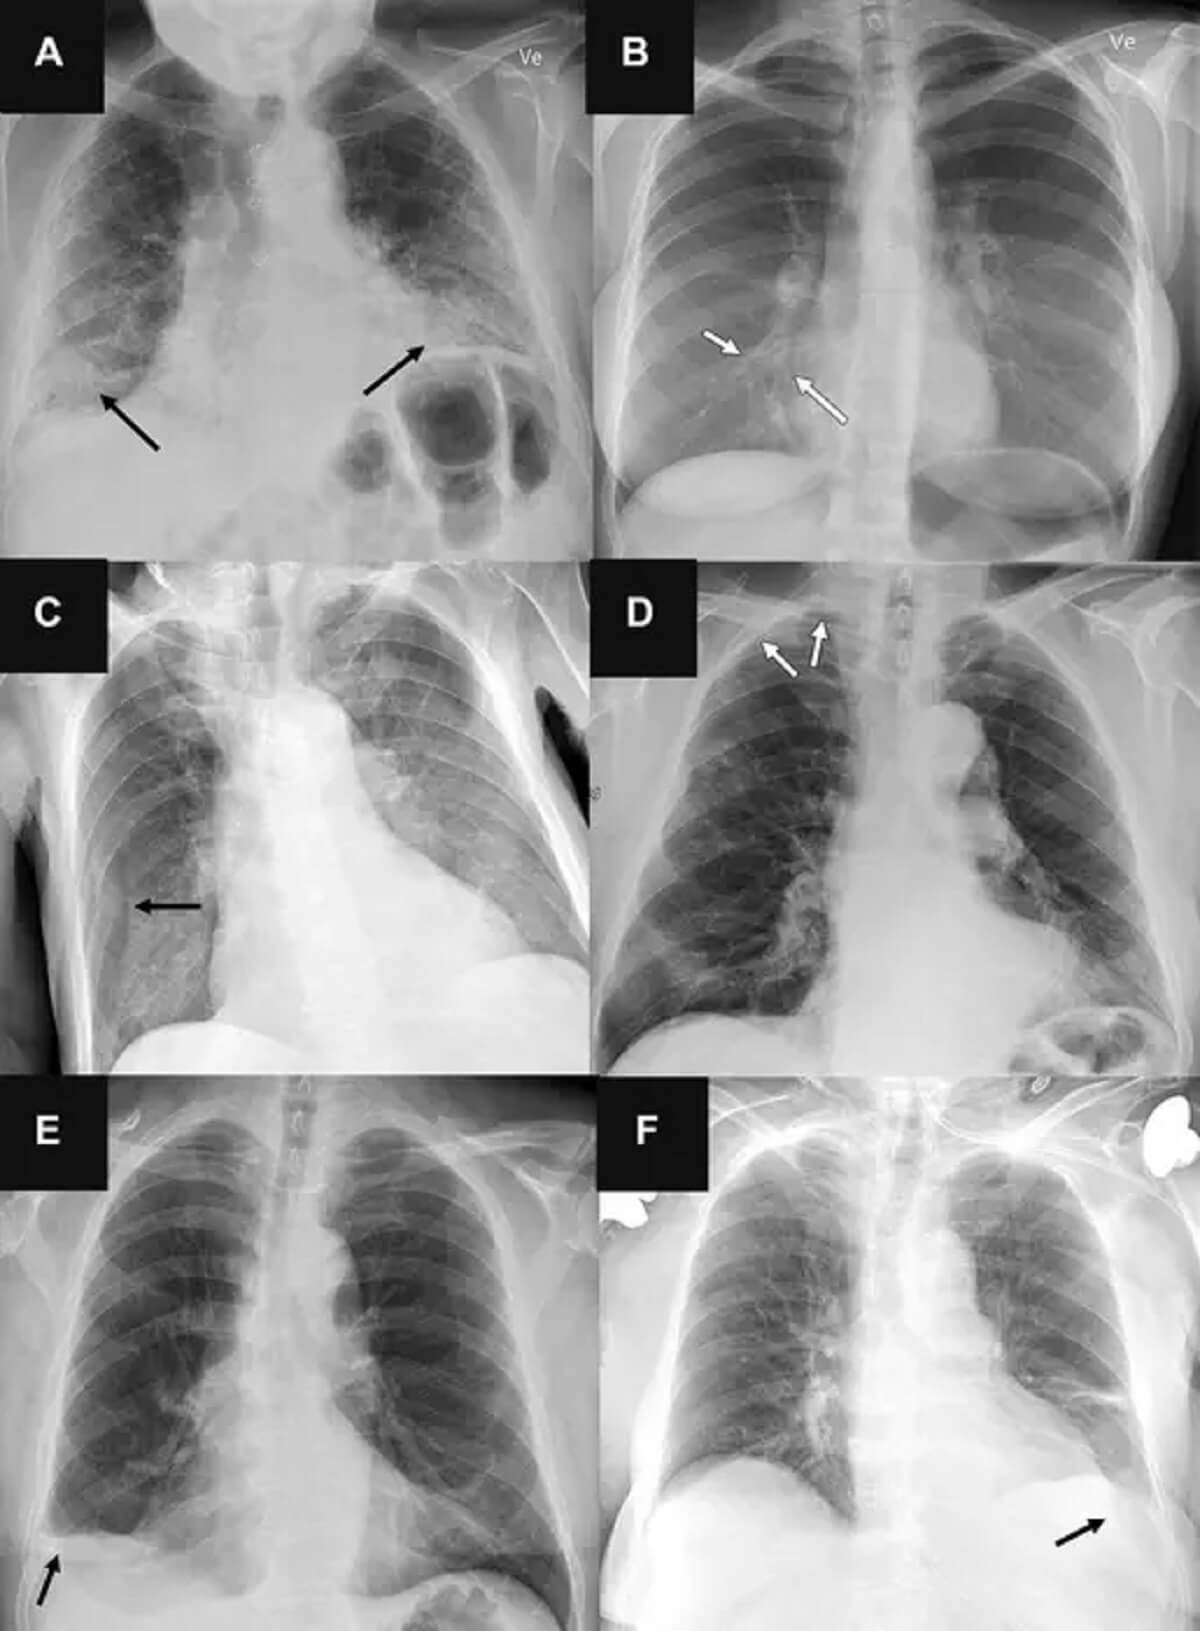 (A) Posteroanterior chest radiograph in a 71-year-old male patient who underwent examination due to progression of dyspnea shows bilateral fibrosis (arrows) (B) Posteroanterior chest radiograph in a 31-year-old female patient referred for radiography due to month-long coughing shows subtle airspace opacity at the right cardiac border (arrows). (C) Anteroposterior chest radiograph in a 78-year-old male patient referred after placement of a central venous catheter shows a skin fold on the right side (arrow). (D) Posteroanterior chest radiograph in a 78-year-old male patient referred to rule out pneumothorax shows very subtle apical right-sided pneumothorax (arrows). (E) Posteroanterior chest radiograph in a 72-year-old male patient referred for radiography without a specified reason shows chronic rounding of the costophrenic angle (arrow). (F) Anteroposterior chest radiograph in a 76-year-old female patient referred for radiography due to suspicion of congestion and/or pneumonia shows a very subtle left-sided pleural effusion (arrow), which was missed by all three AI tools that were capable of analyzing anteroposterior chest radiographs for pleural effusion.